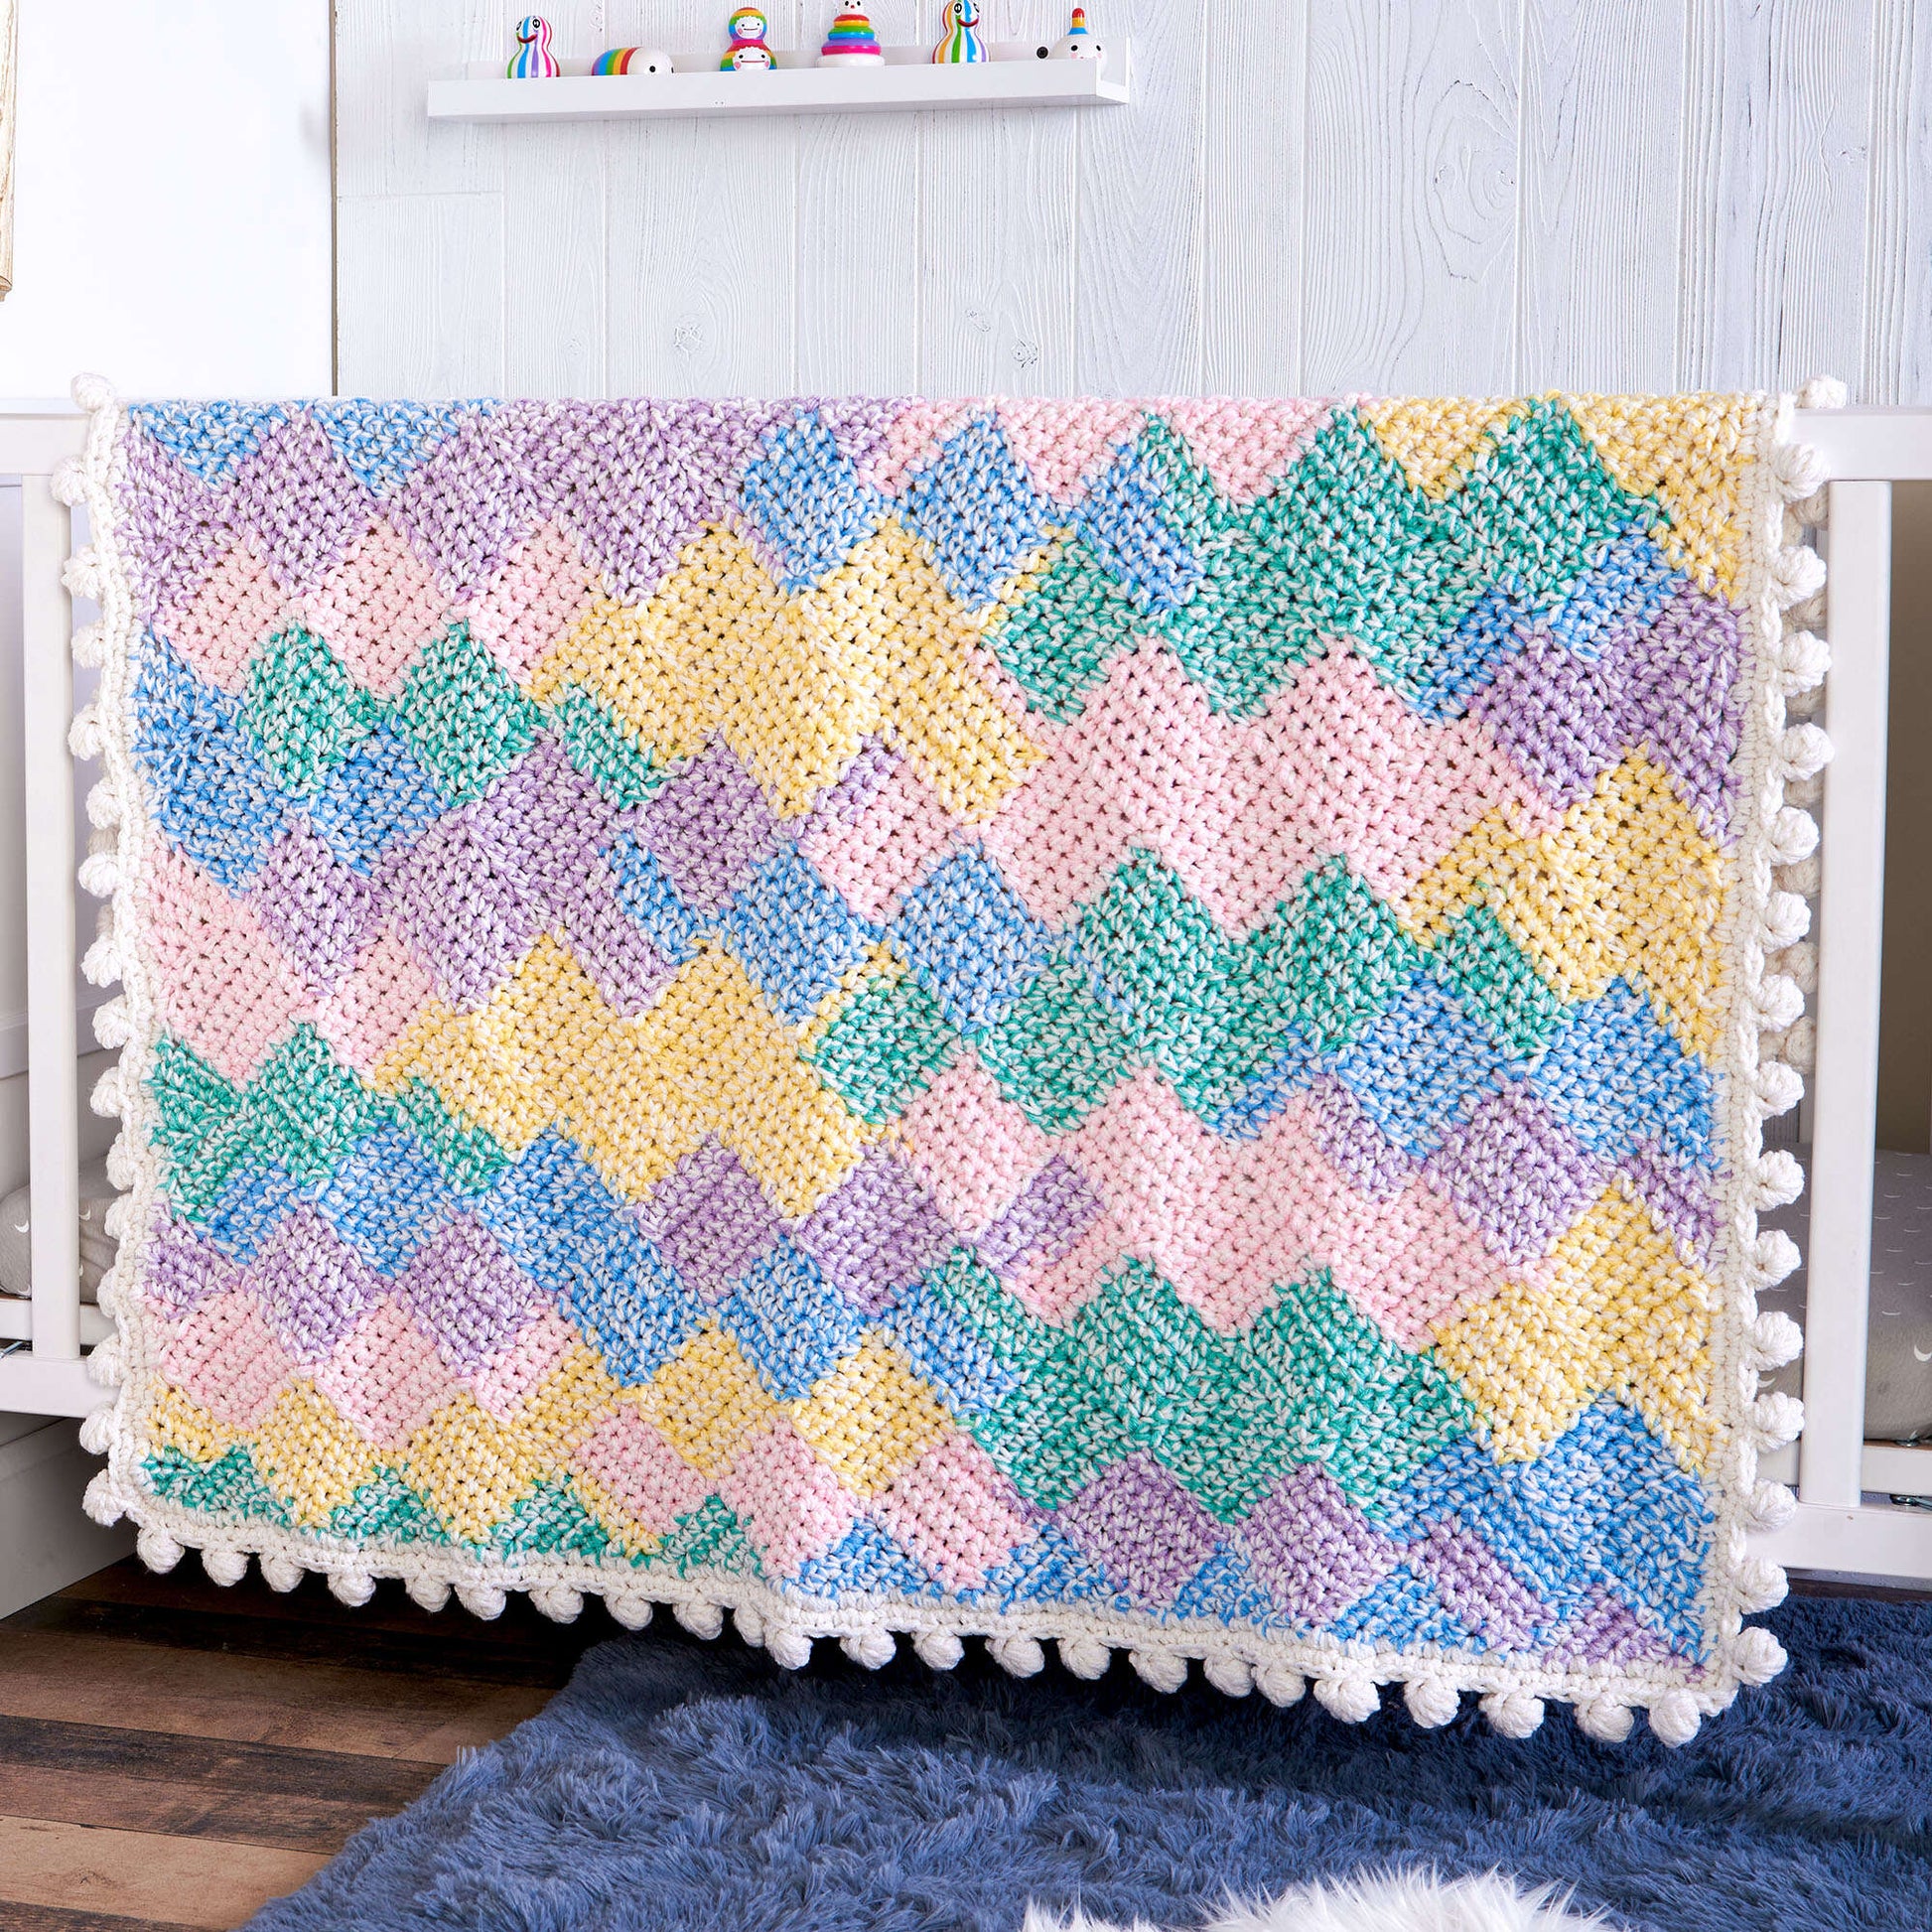 Free Red Heart Marled Entrelac Crochet Baby Blanket Pattern